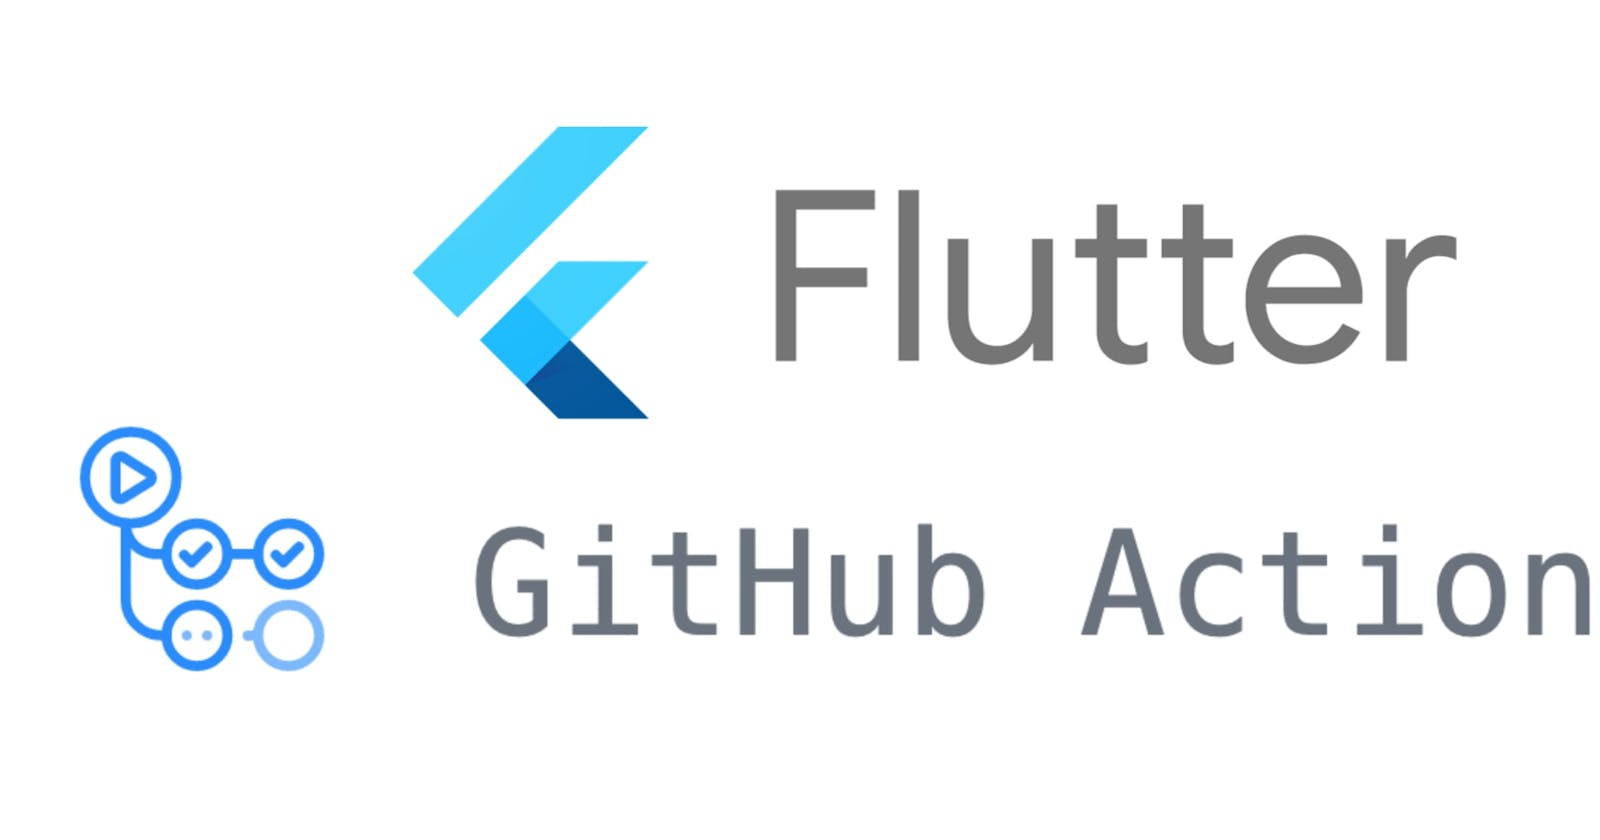 Implementing CI/CD for Flutter apps Using GitHub Actions